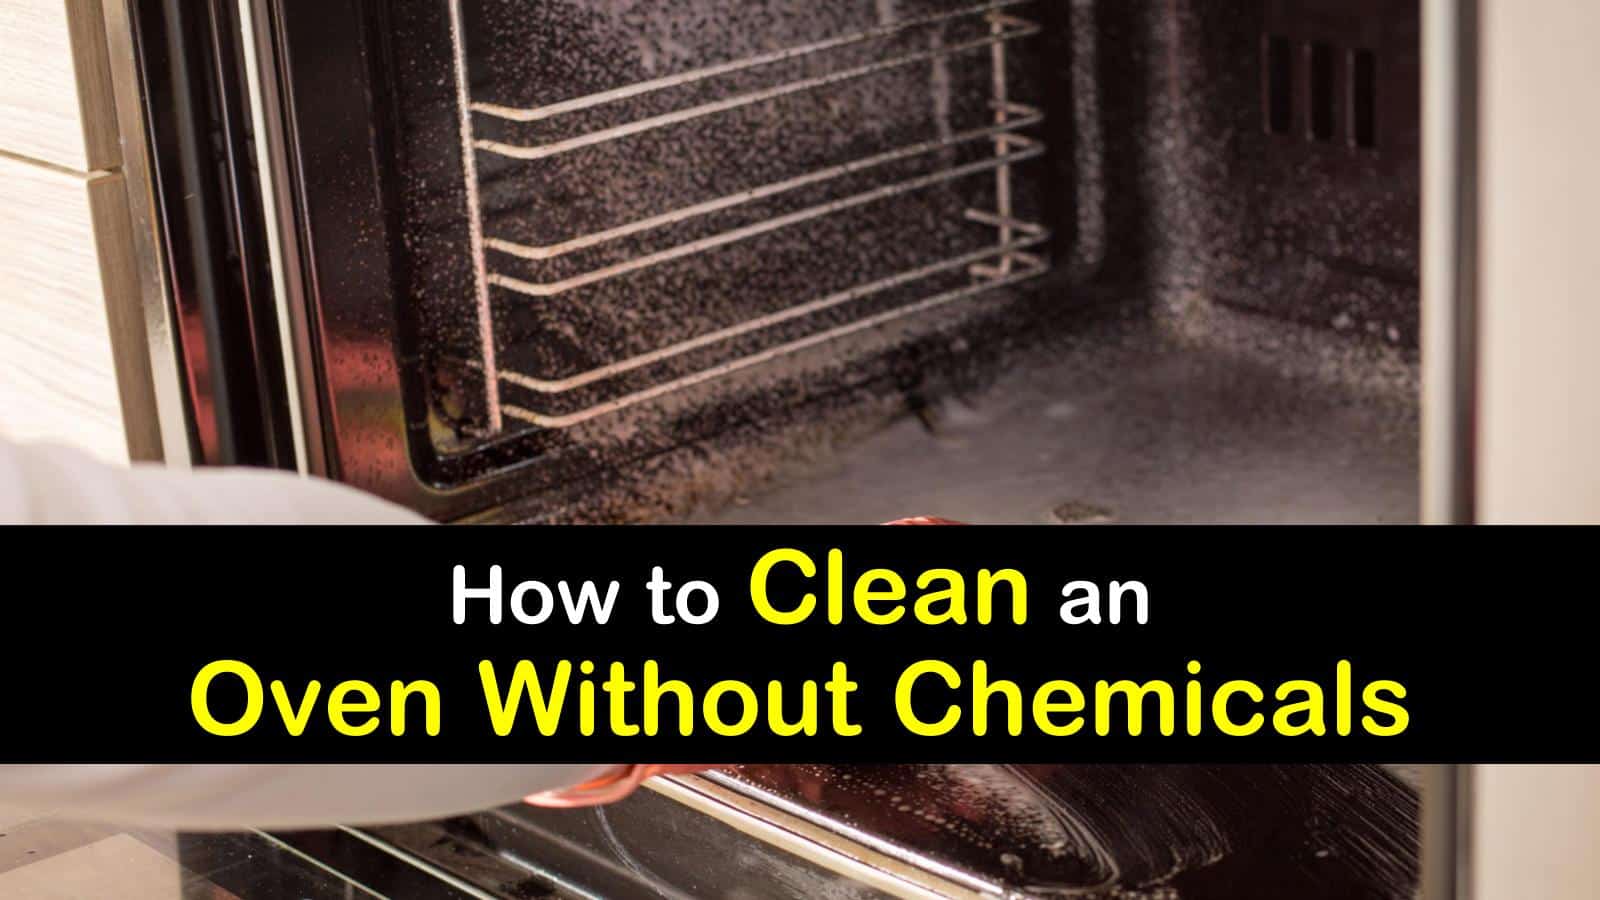 how to clean an oven without chemicals titleimg1